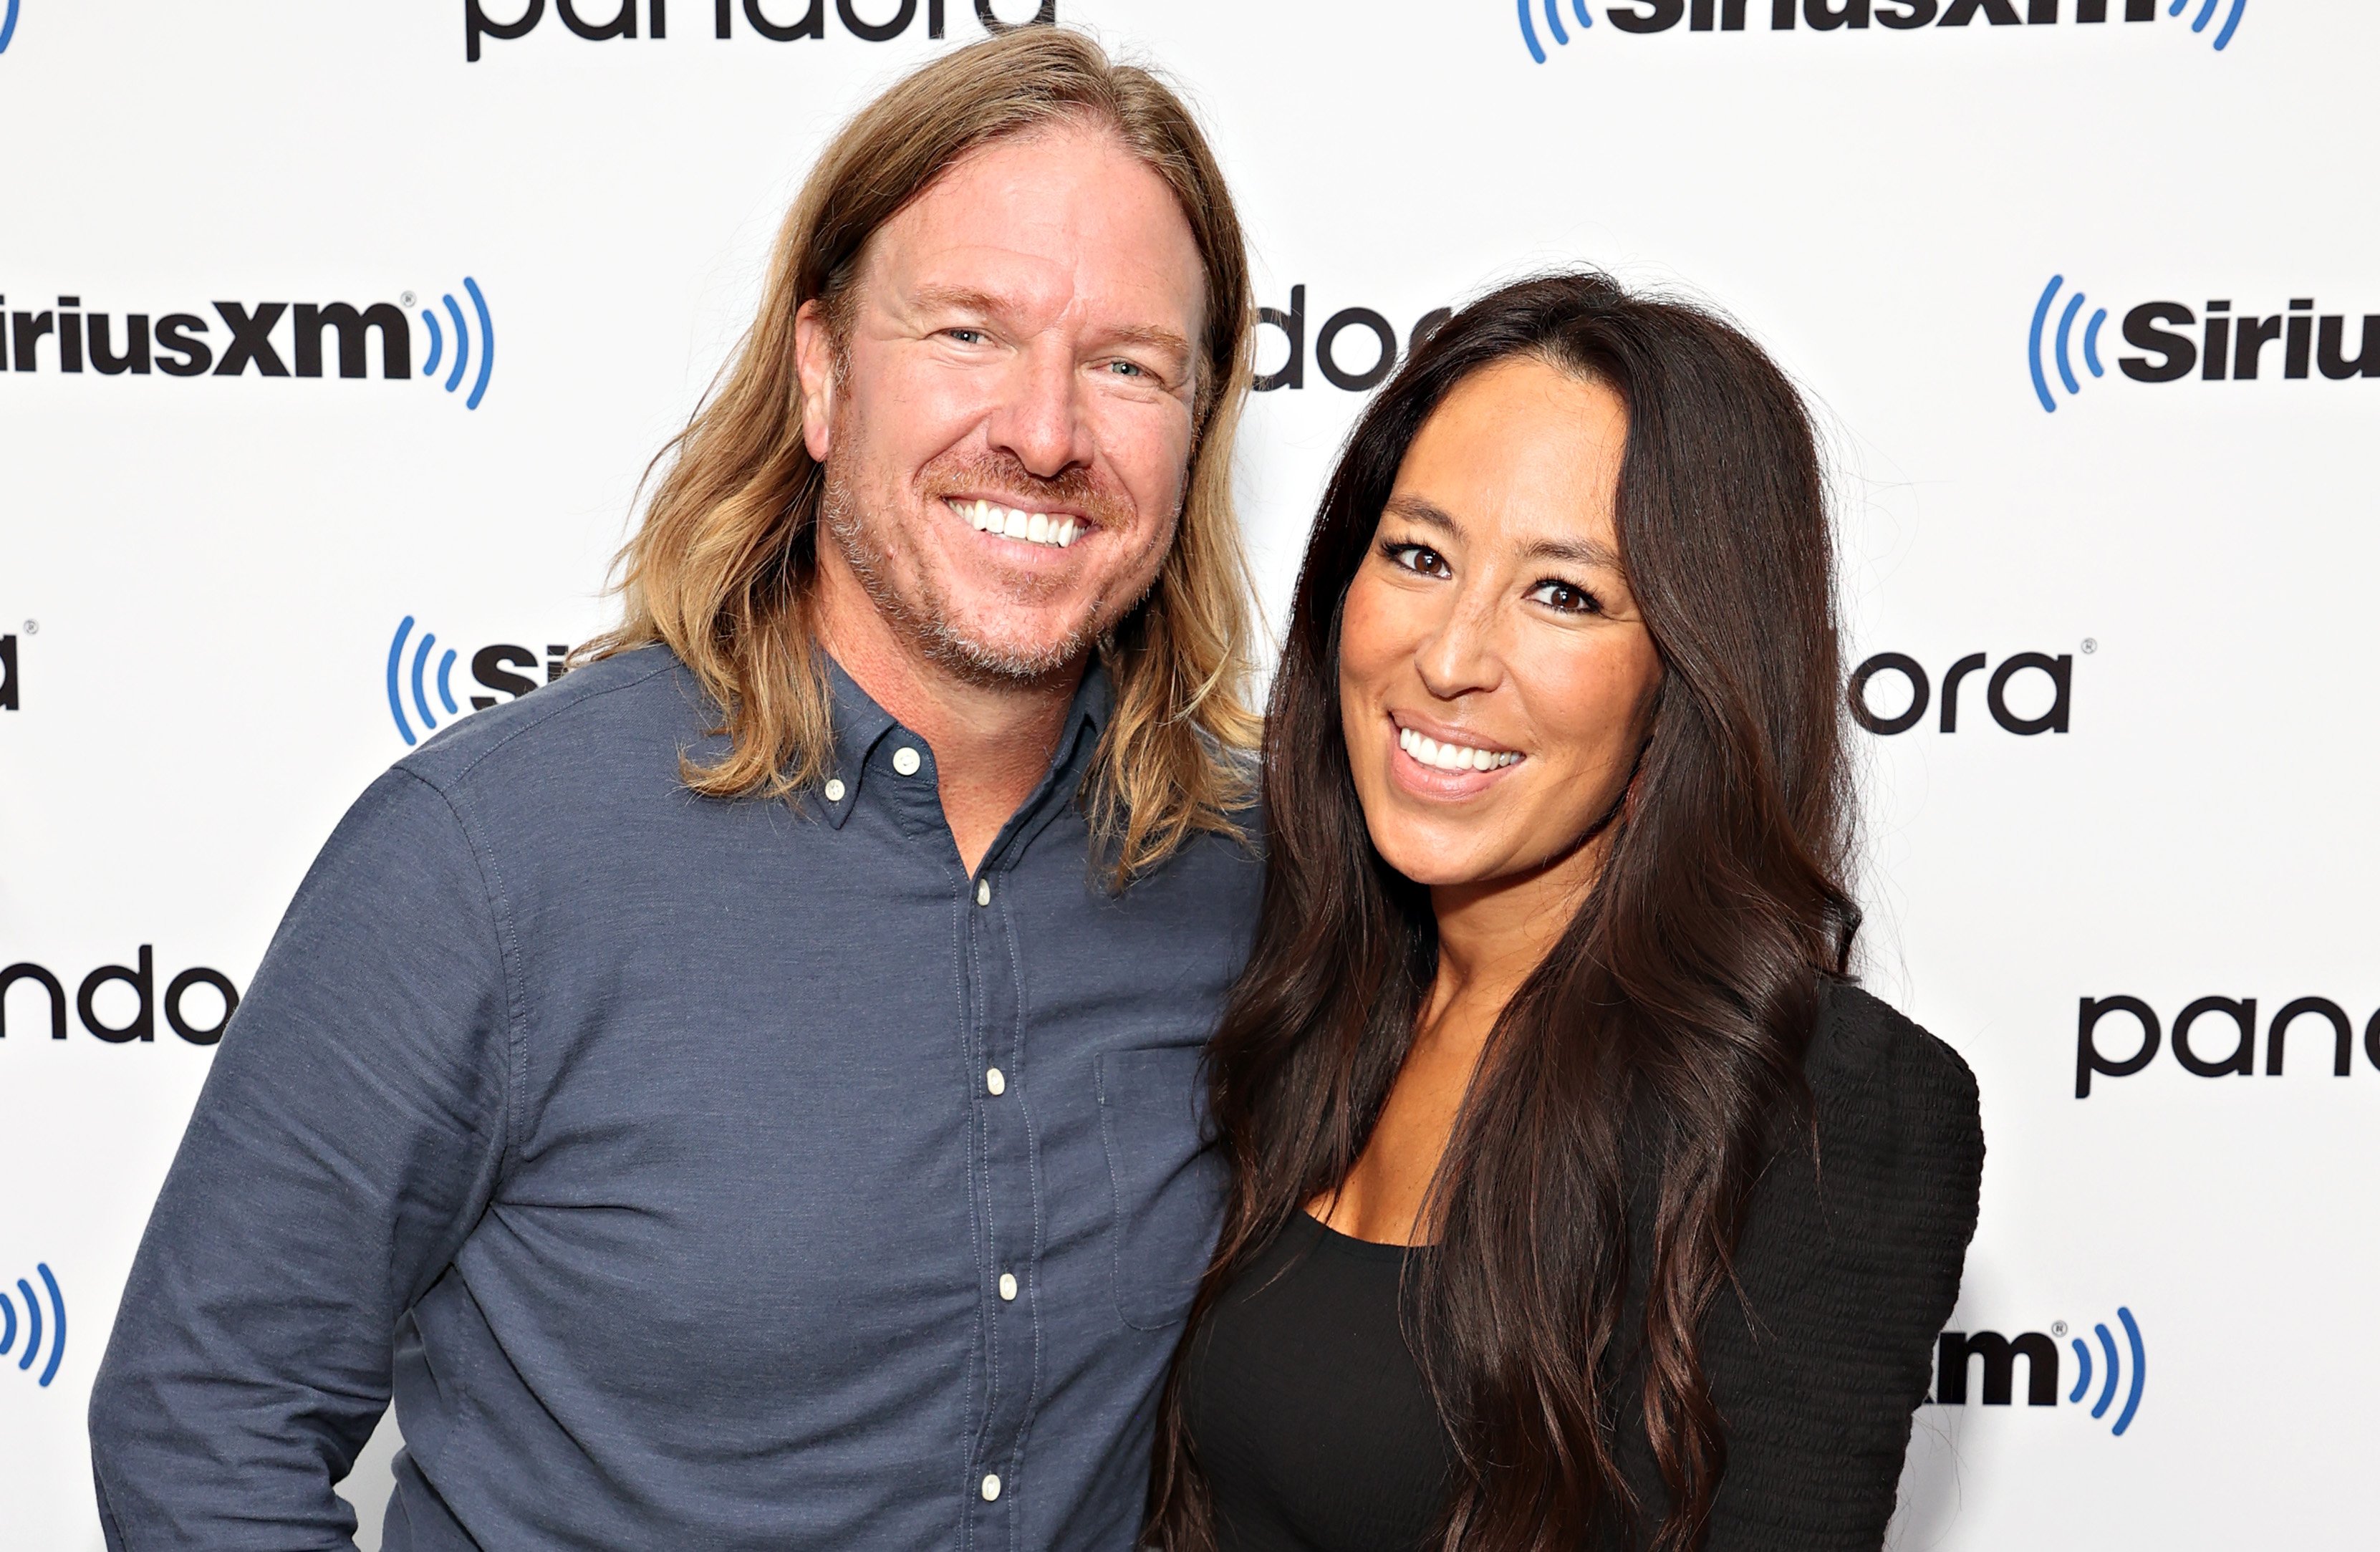 Chip and Joanna Gaines pose at an event